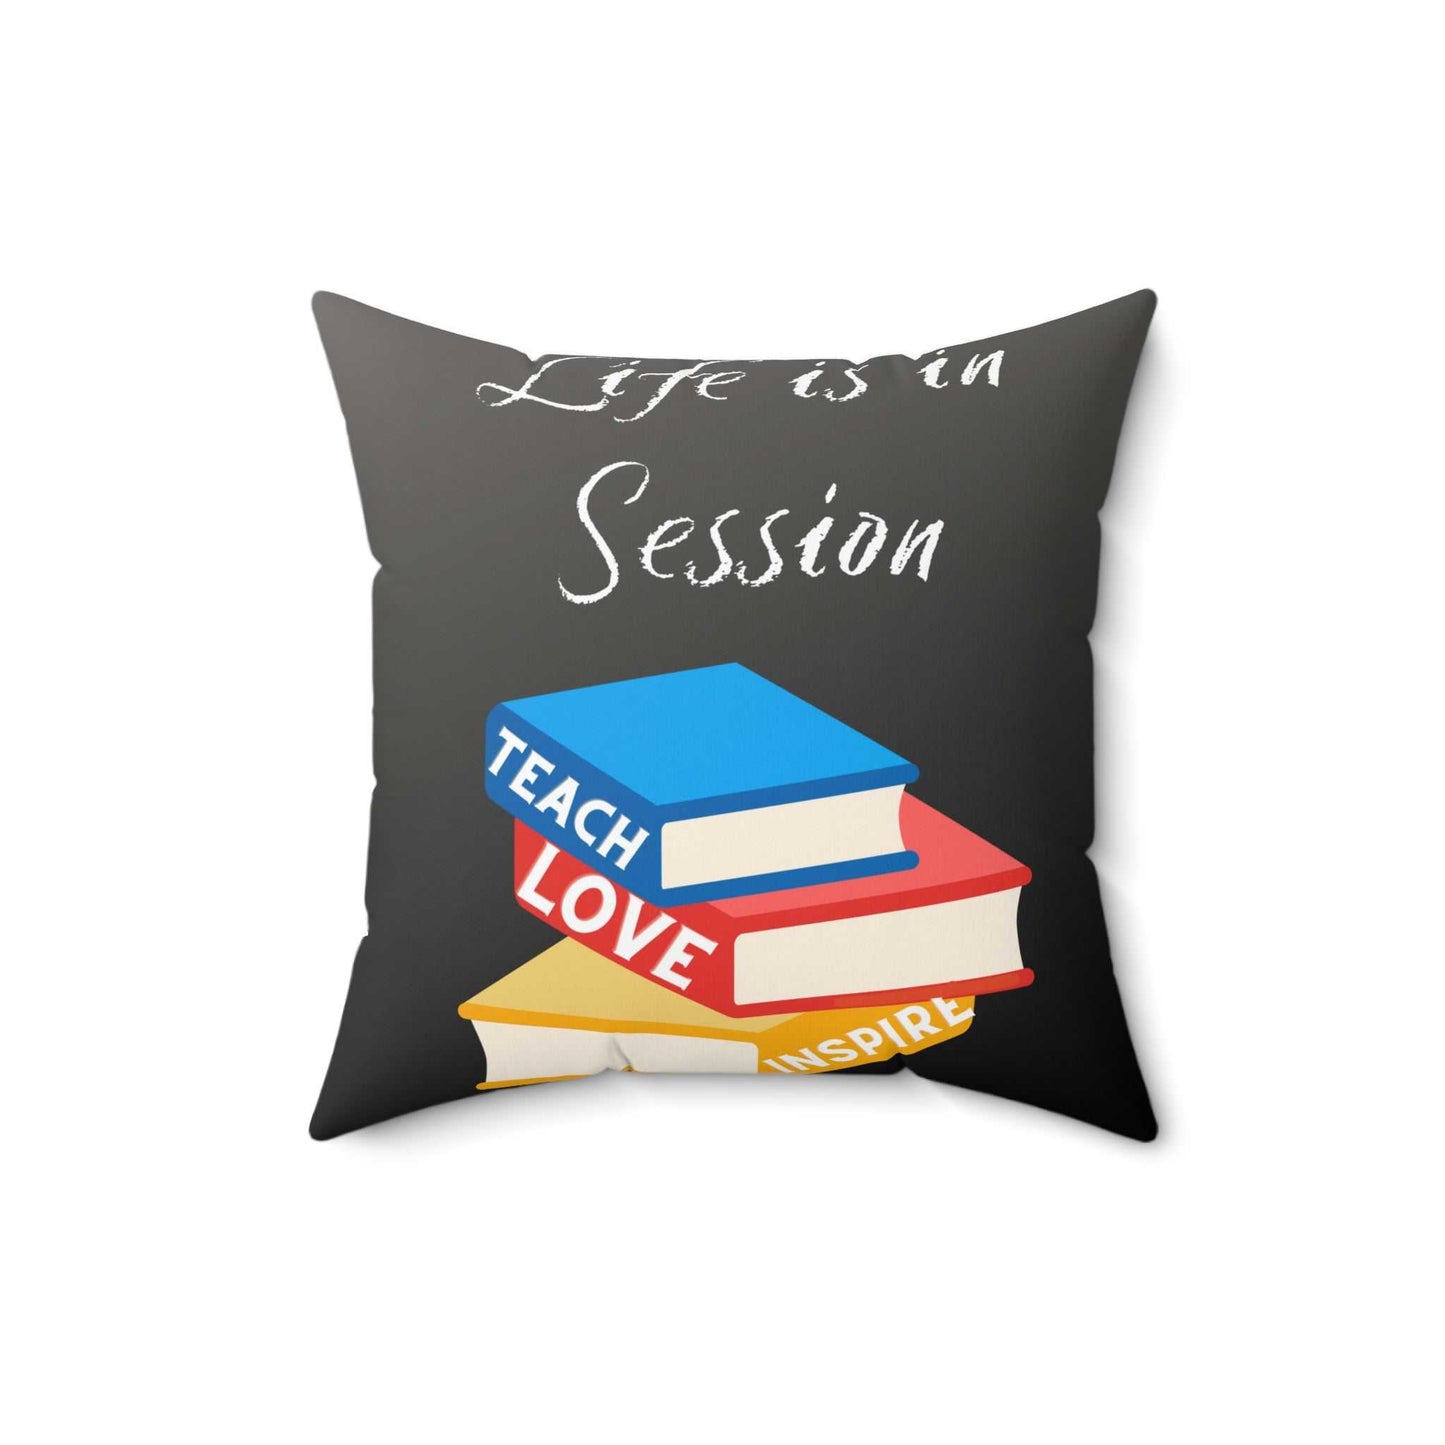 Life is in Session Spun Polyester Square Pillow All Products Home Decor Good Vibes Daily Lab 26